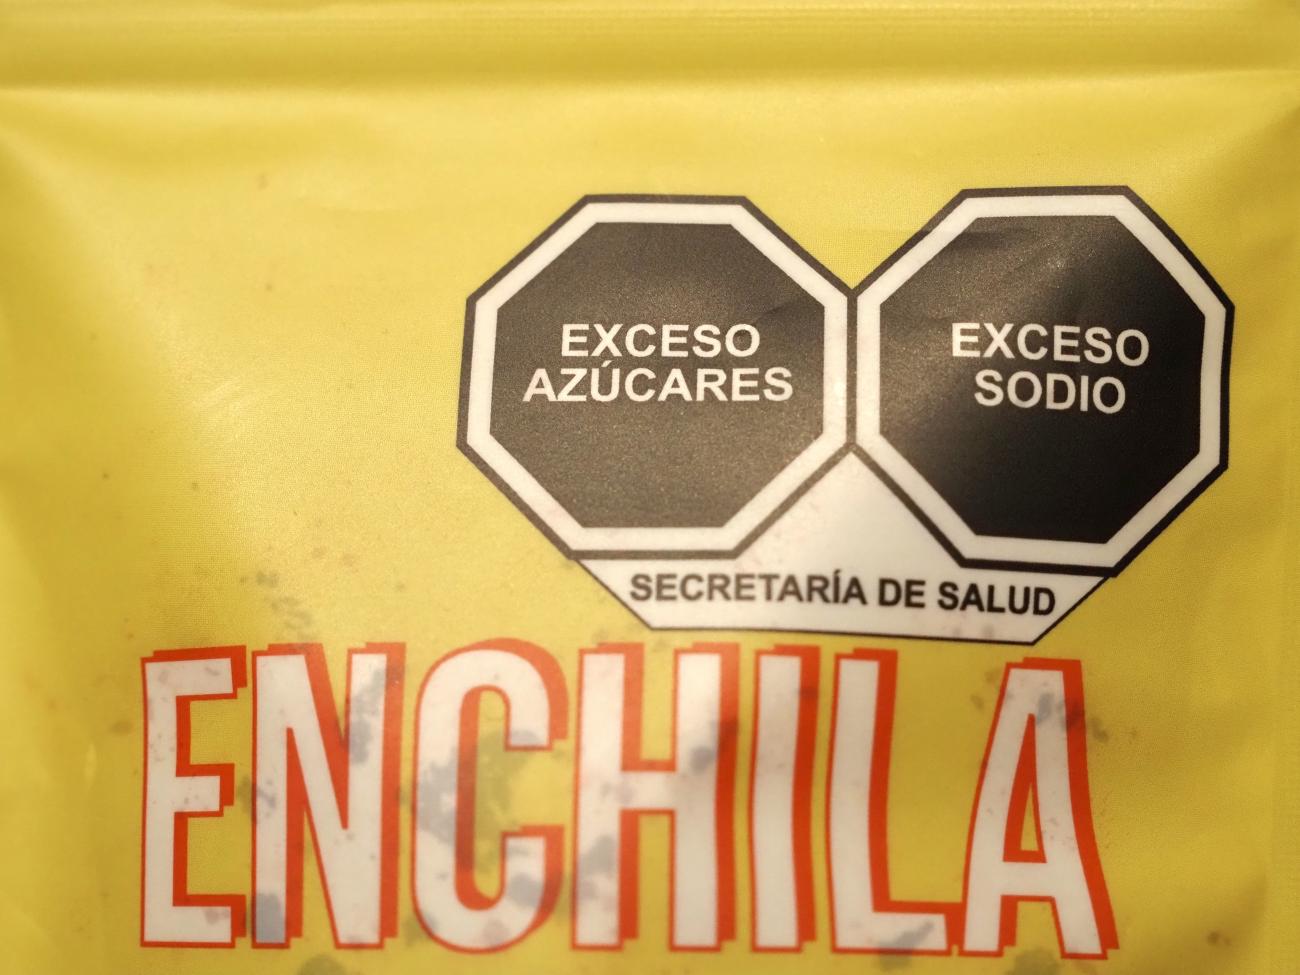 Products with warning labels in Mayelela Lopez's grocery store, in Hidalgo, Mexico, on January 2, 2023.